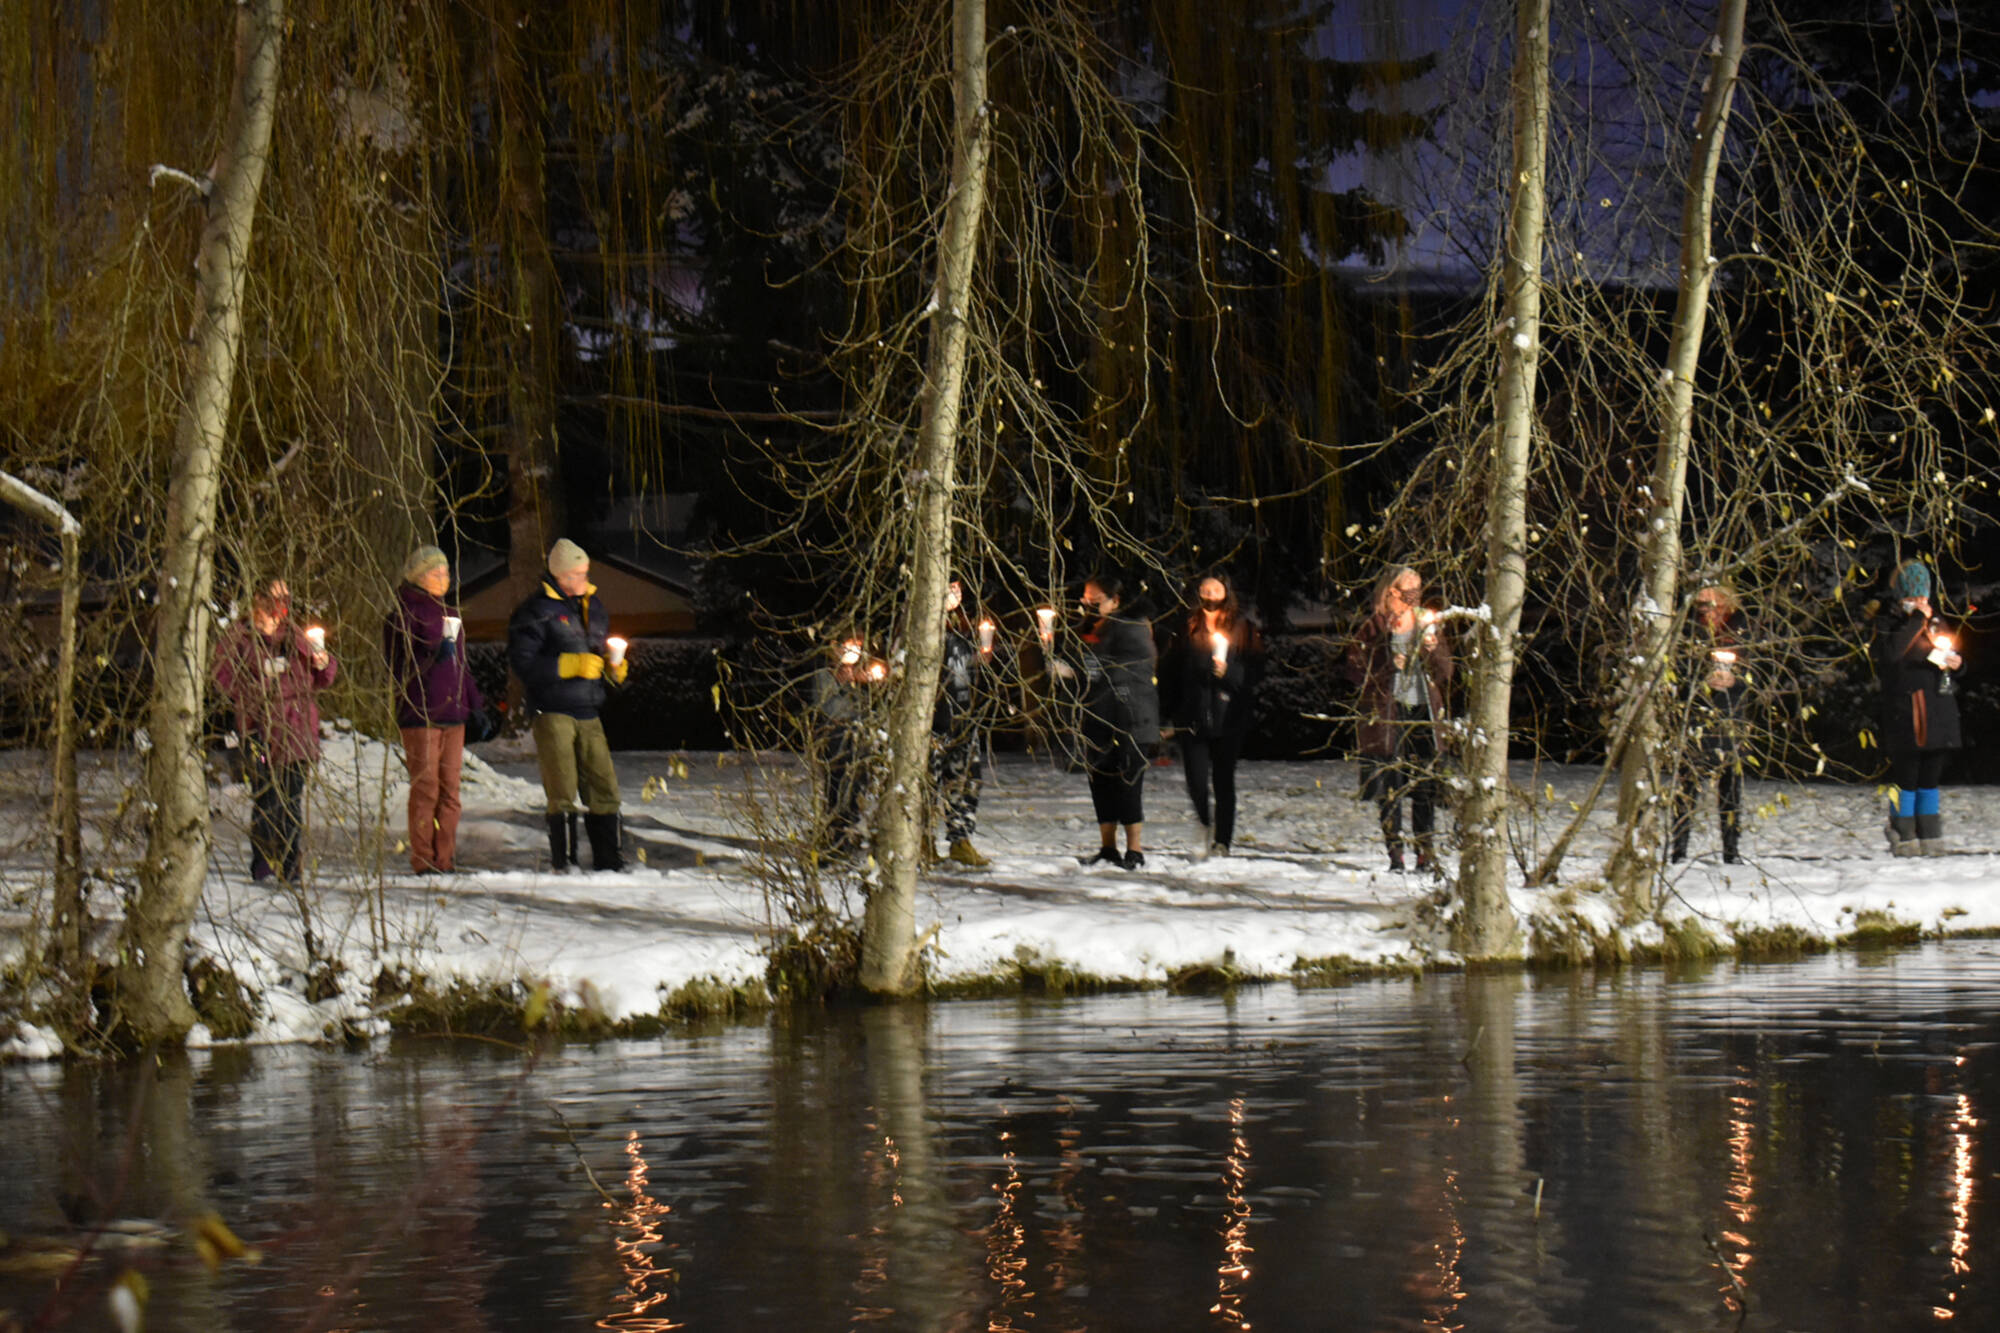 People gather at the edge of the pond at the Salmon Arm campus of Okanagan College on Dec. 6 during the United Against Violence Against Women candlelight vigil held to mark the 1989 massacre of 14 women at Ecole Polytechnique in Montreal as well as to remember and bear witness to the women murdered and missing in the Okanagan-Shuswap and beyond. (Martha Wickett-Salmon Arm Observer)